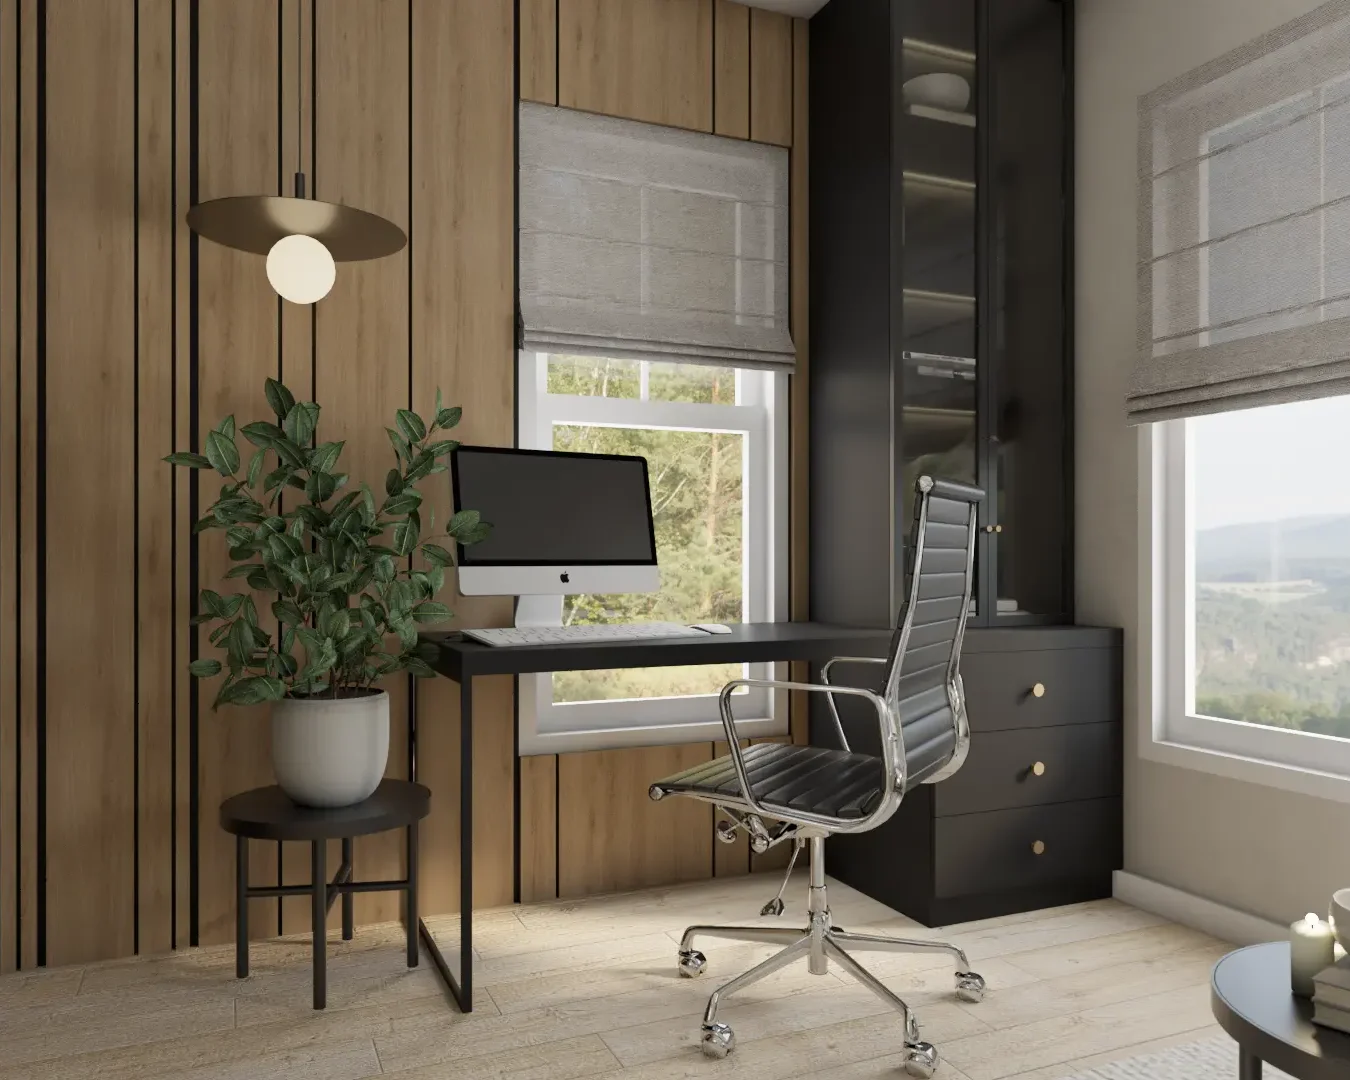 Contemporary home office featuring sleek black furniture and natural wood accents, offering a peaceful and productive environment, designed by Debora in New York City.